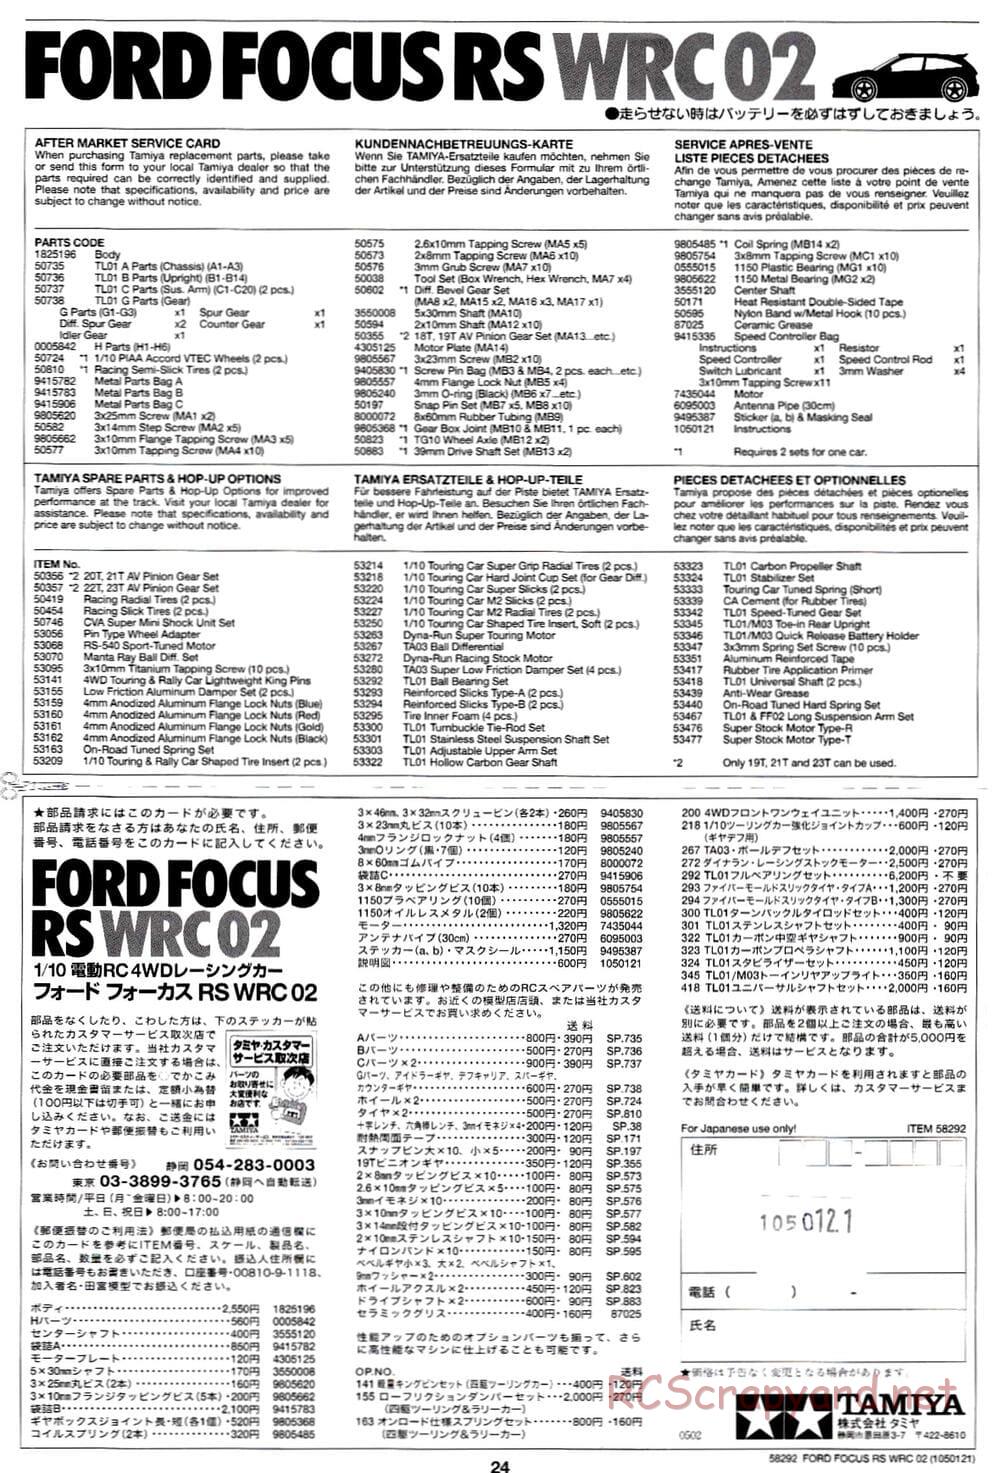 Tamiya - Ford Focus RS WRC 02 - TL-01 Chassis - Manual - Page 24